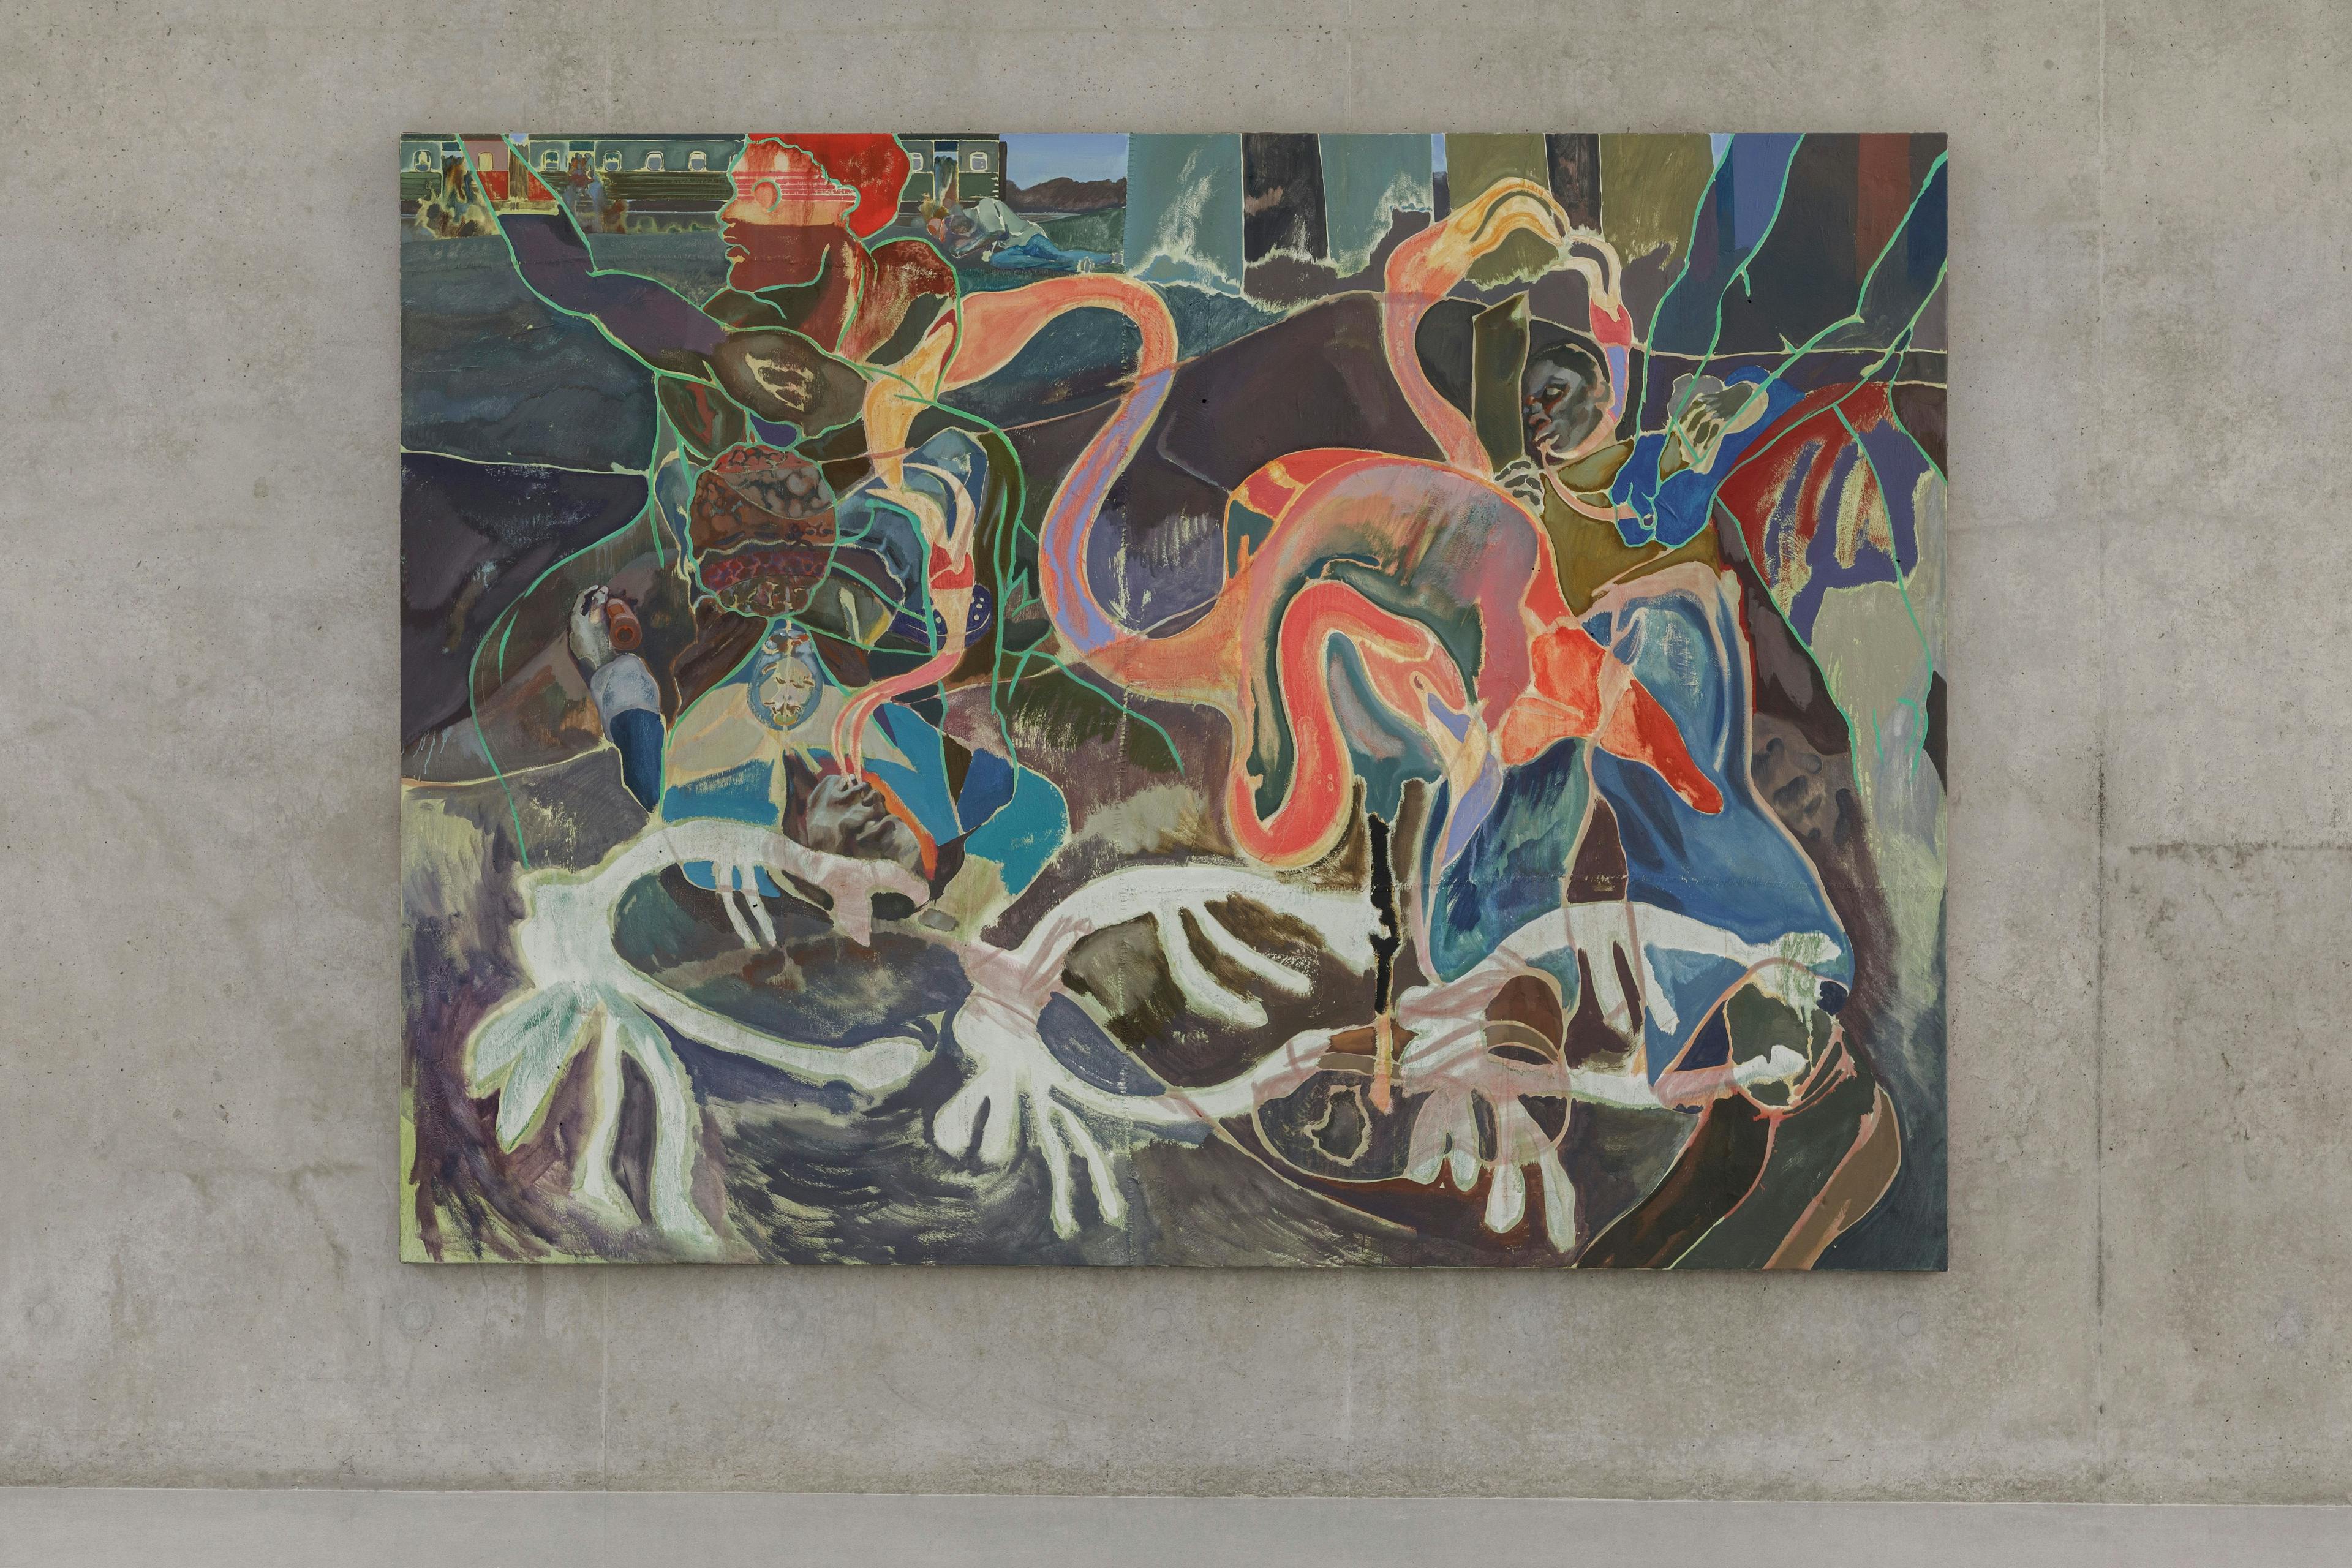 Installation view of the exhibition, Michael Armitage: Pathos and the Twilight of the Idle at Kunsthaus Bregenz, in Bregenz, Austria, dated 2023.